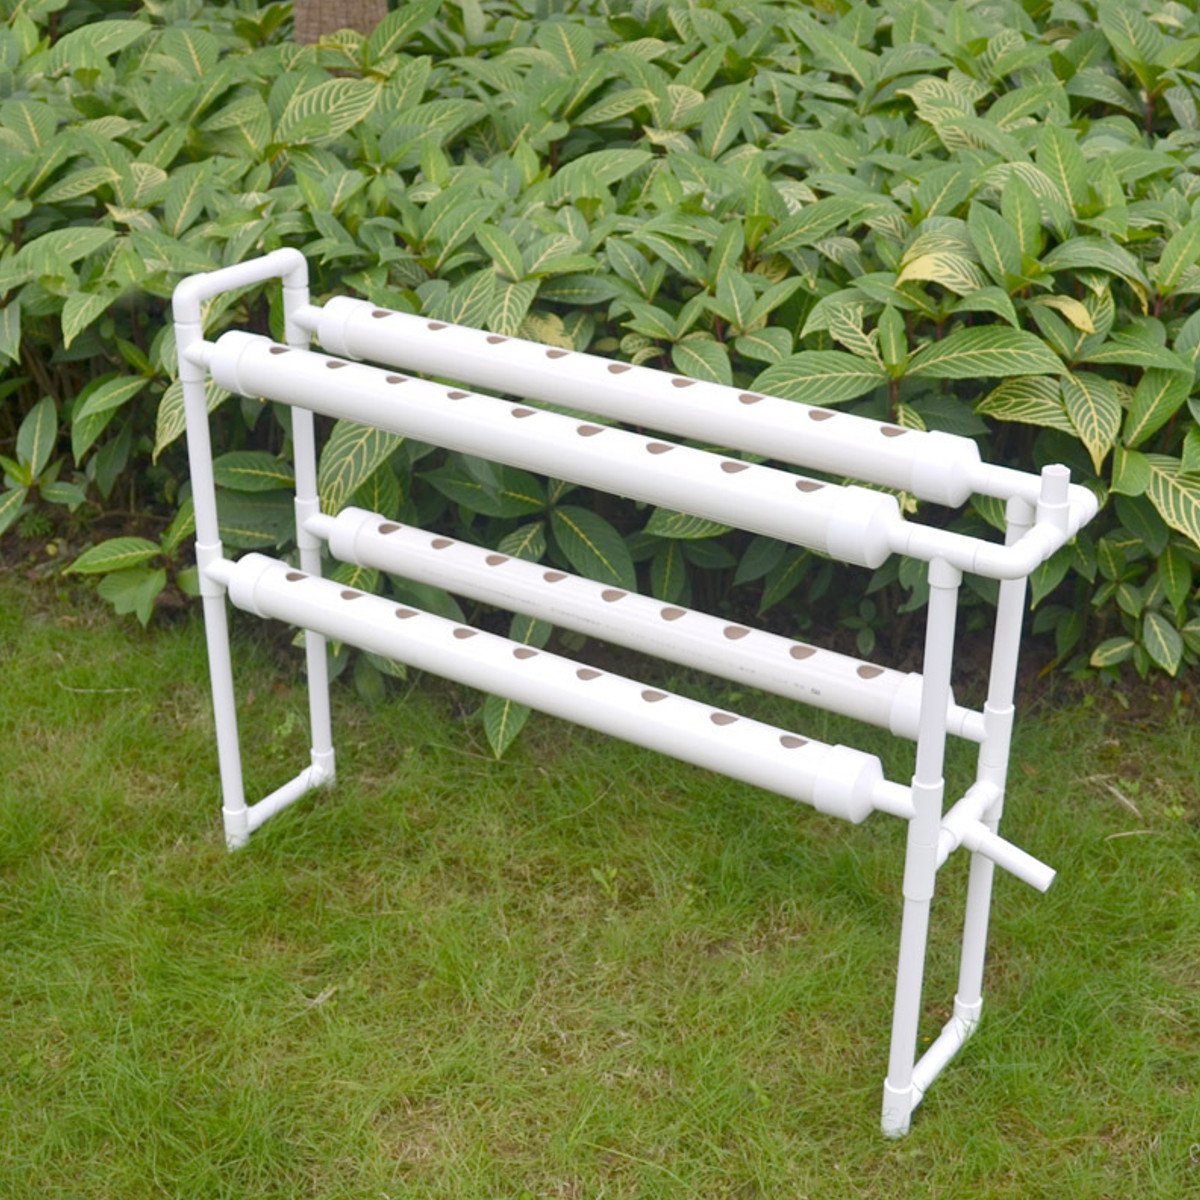 2 Layer 36 Sites Hydroponic Grow Kit Ebb Flow Deep Water Culture Growing DWC Planting Garden Vegetable System 2